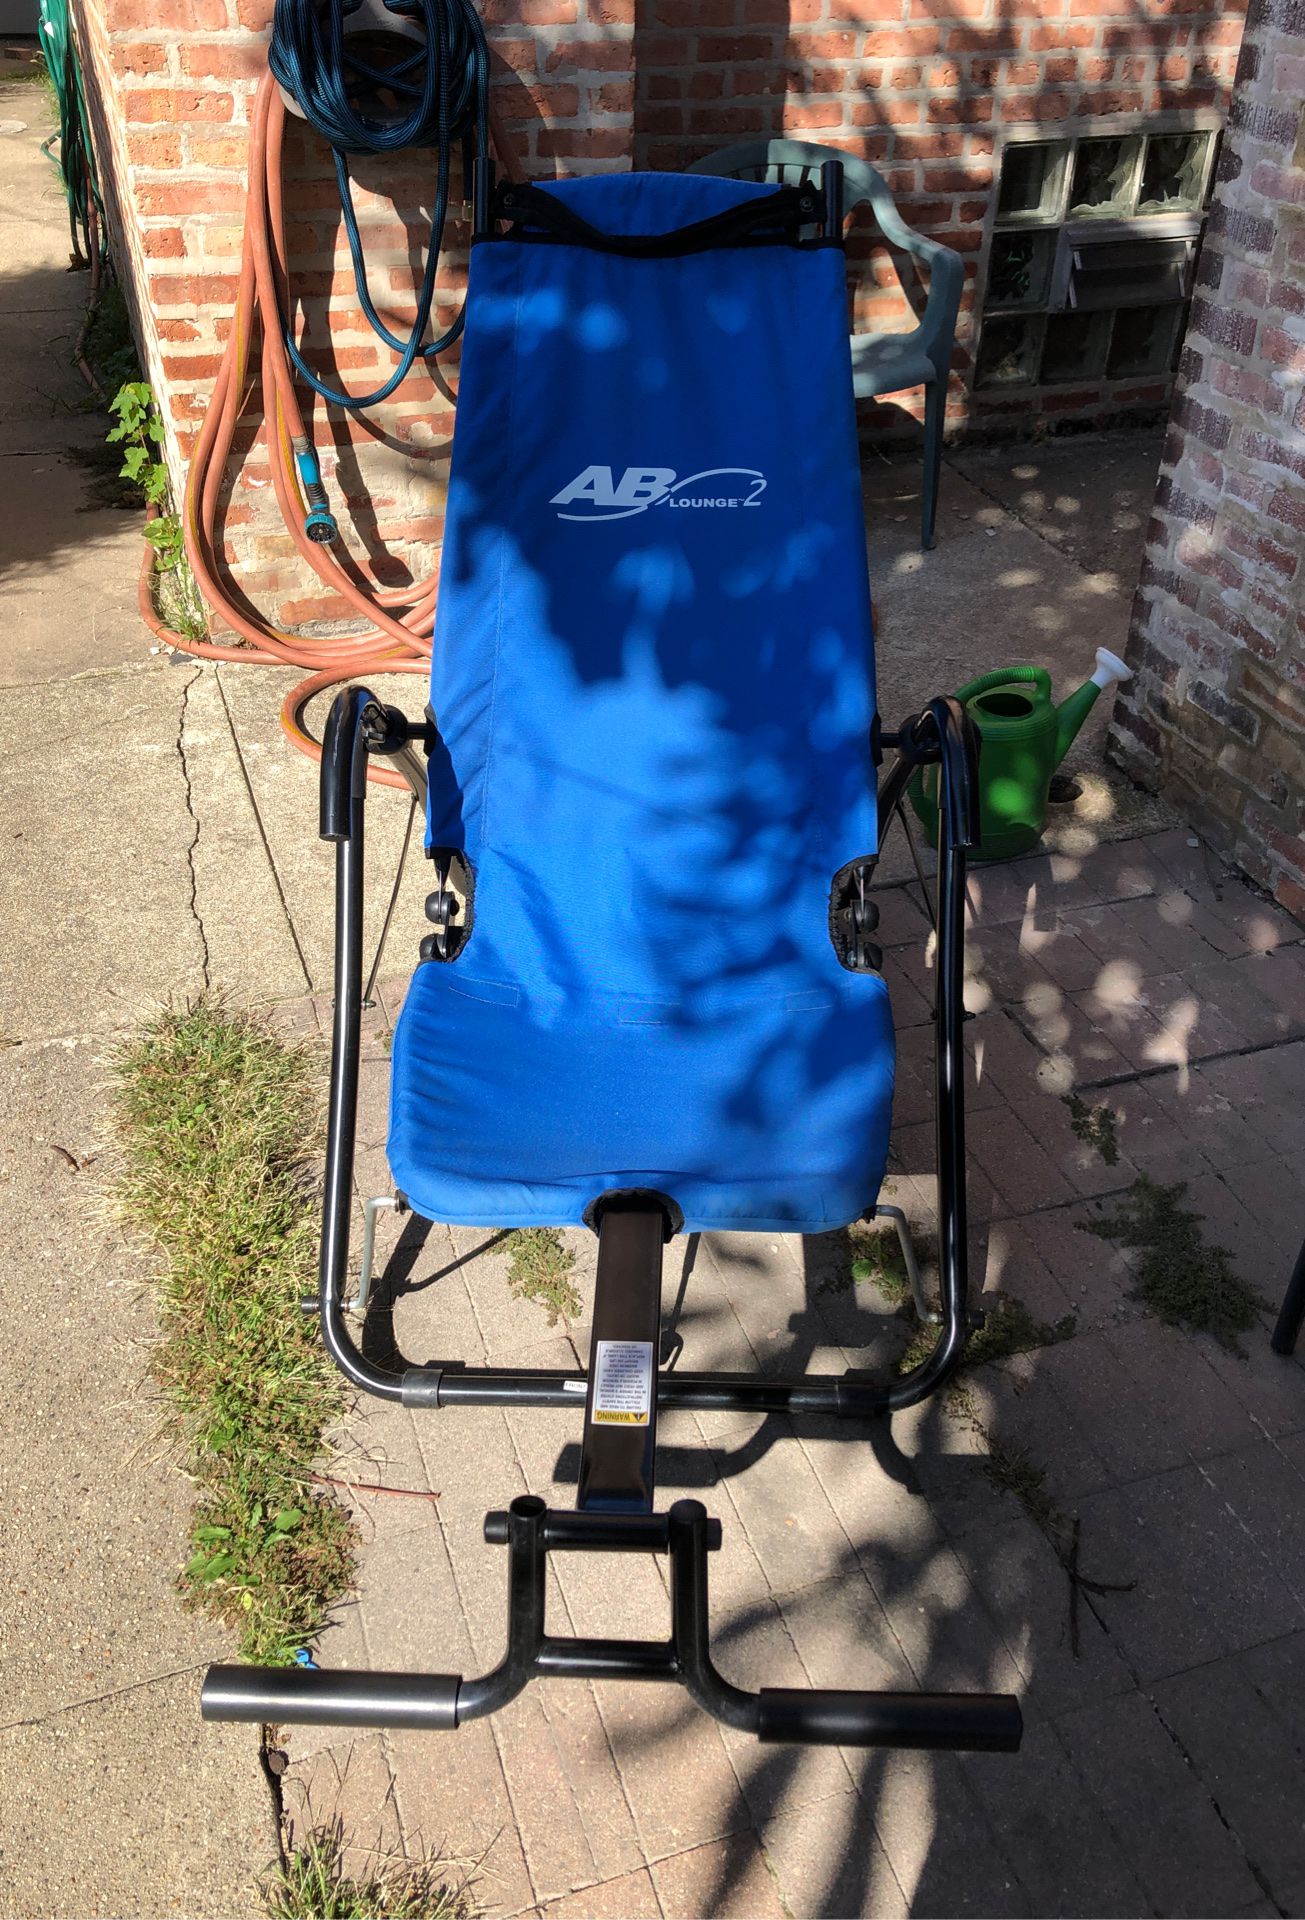 Ab lounge 2 workout chair